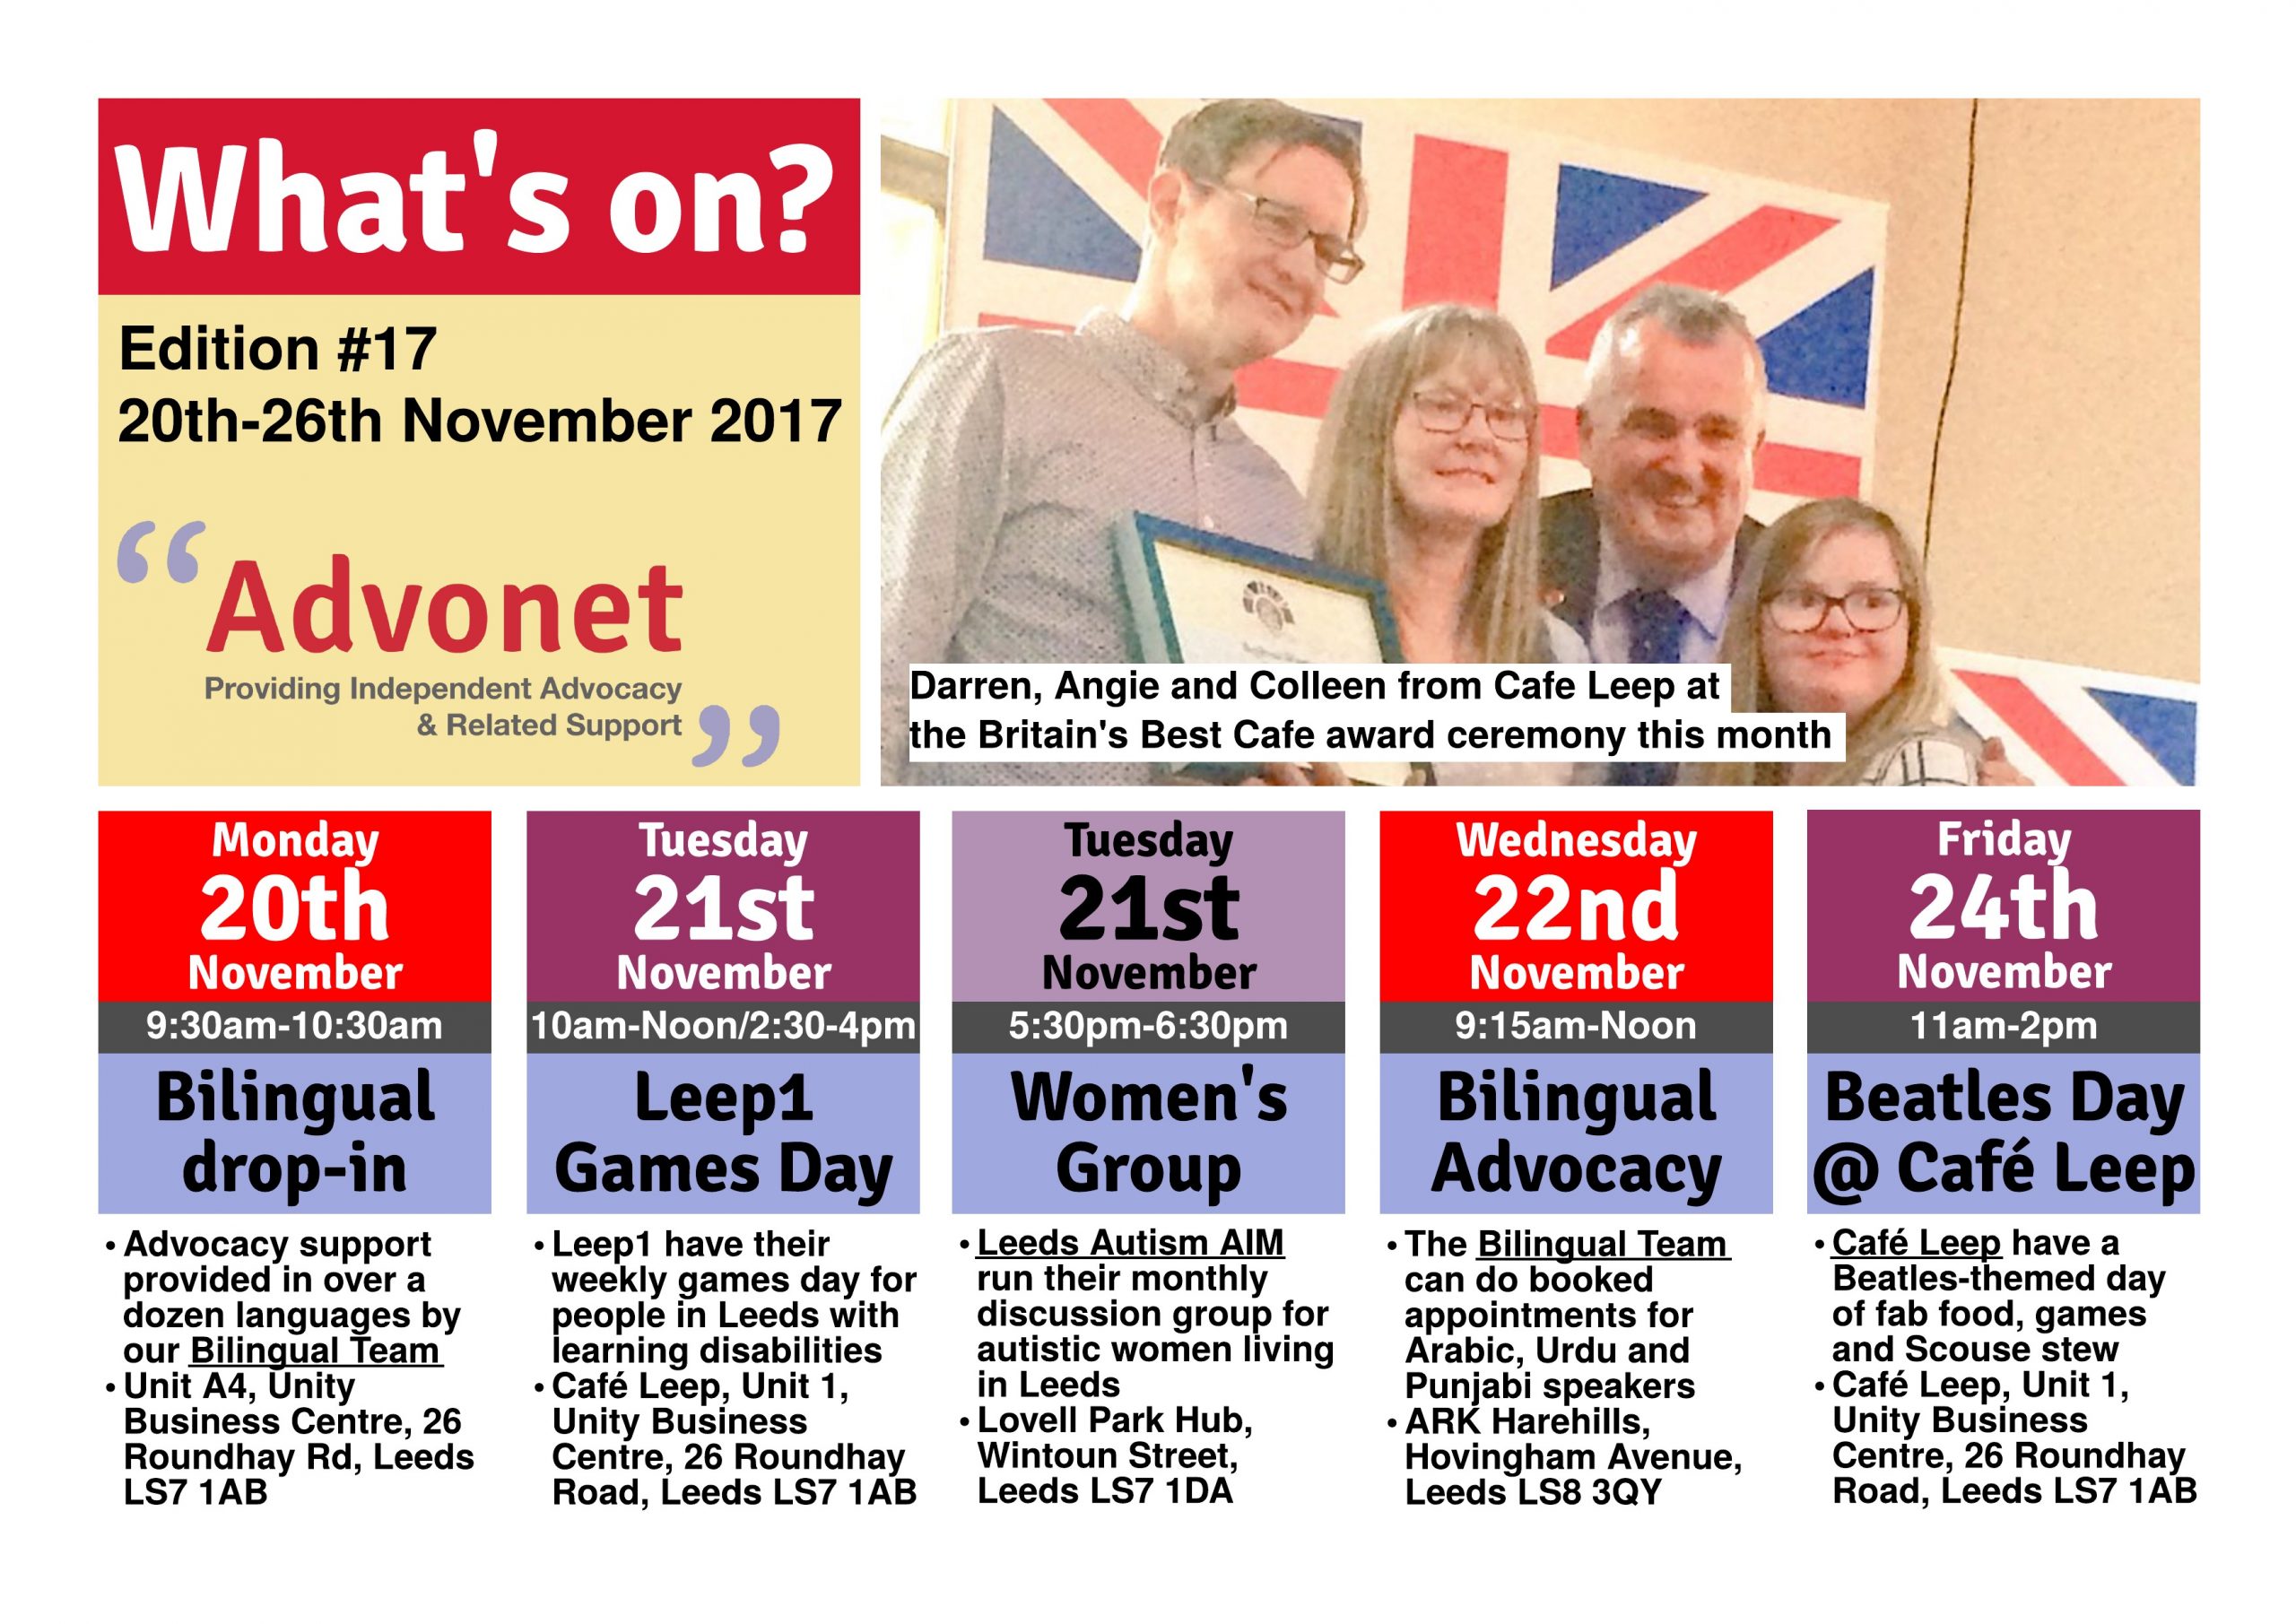 What's on 20-26th Nov 2017